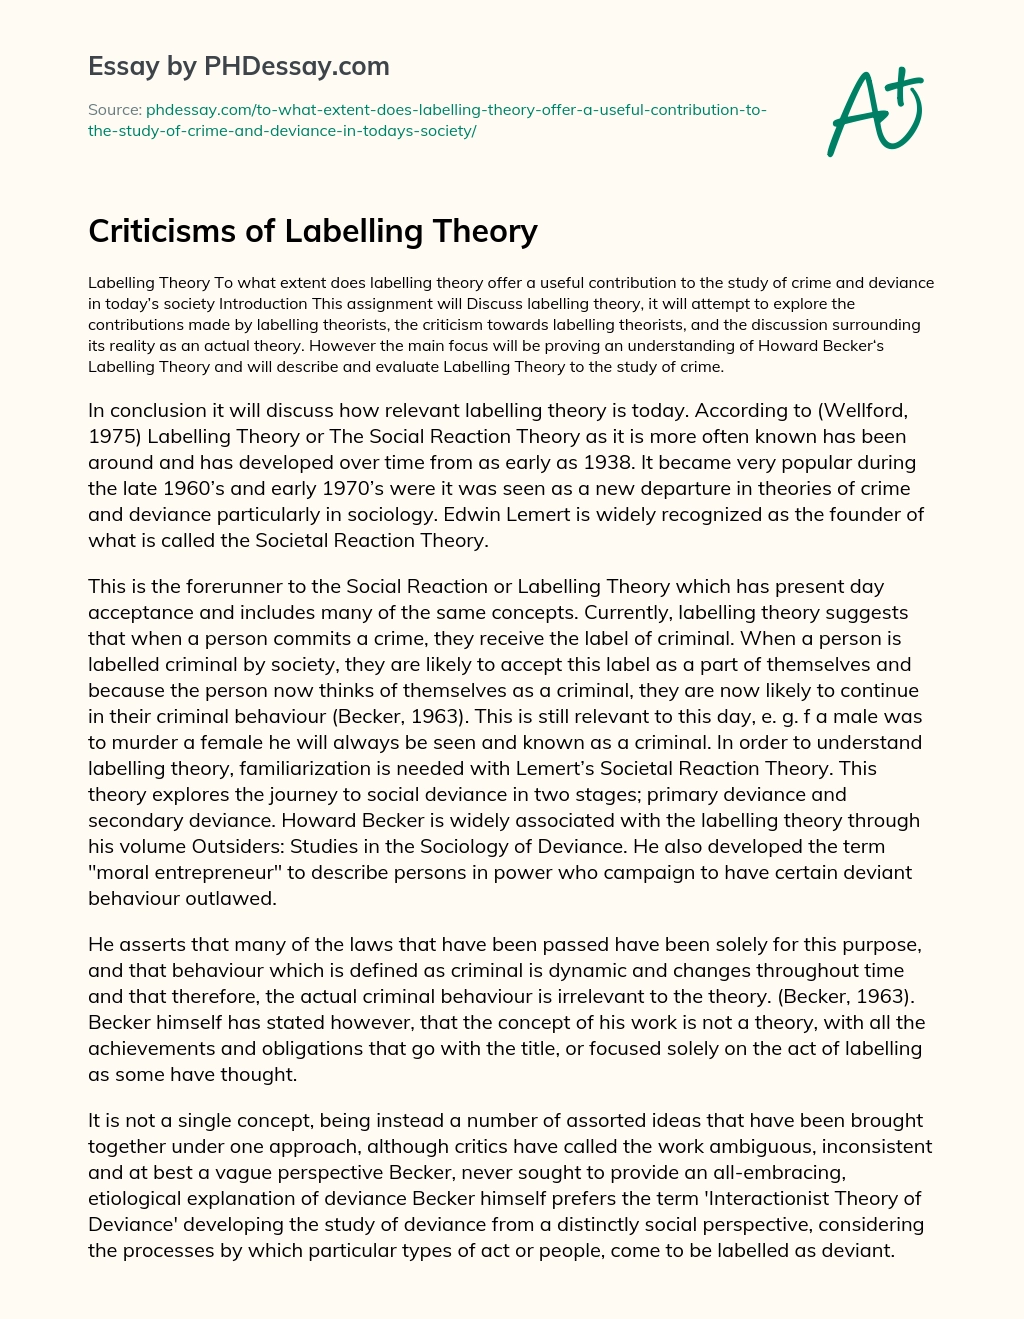 Criticisms of Labelling Theory essay